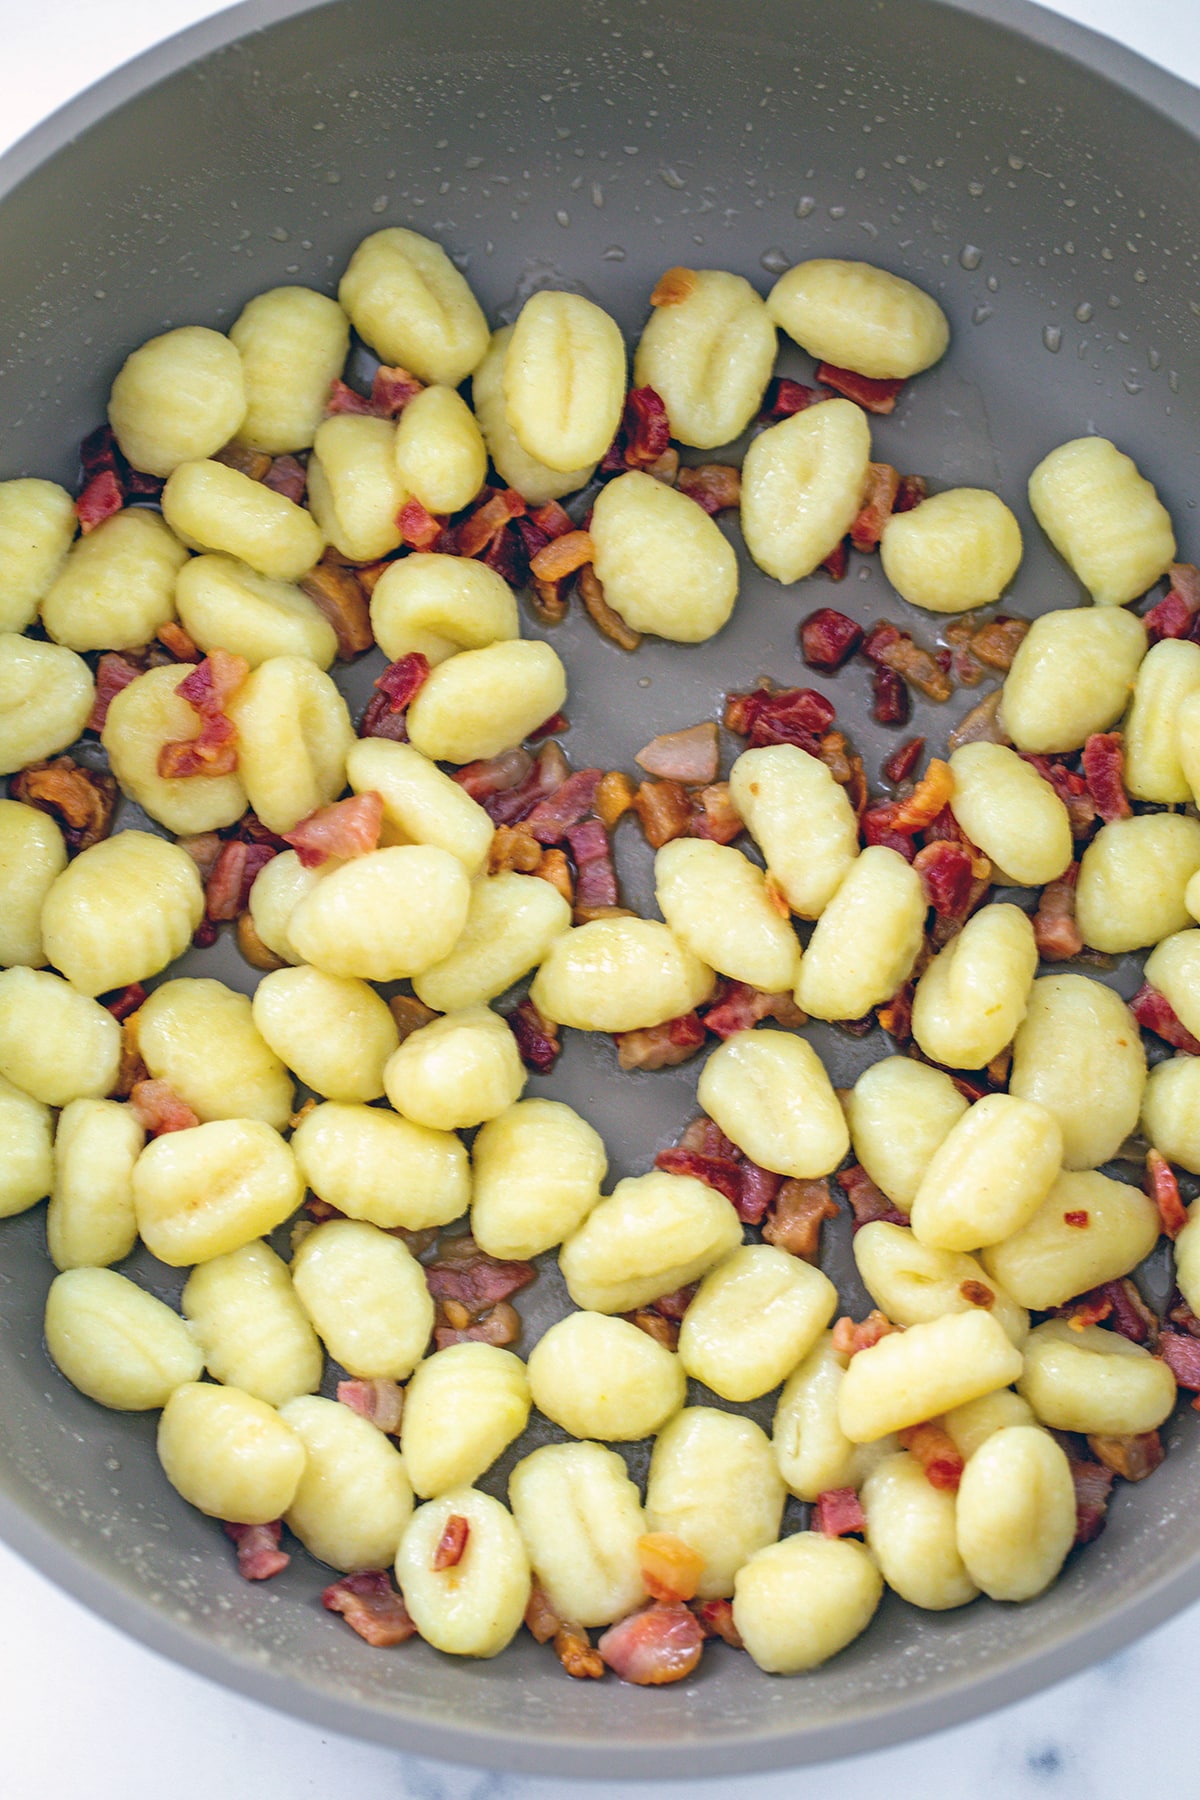 Gnocchi and pancetta in skillet.